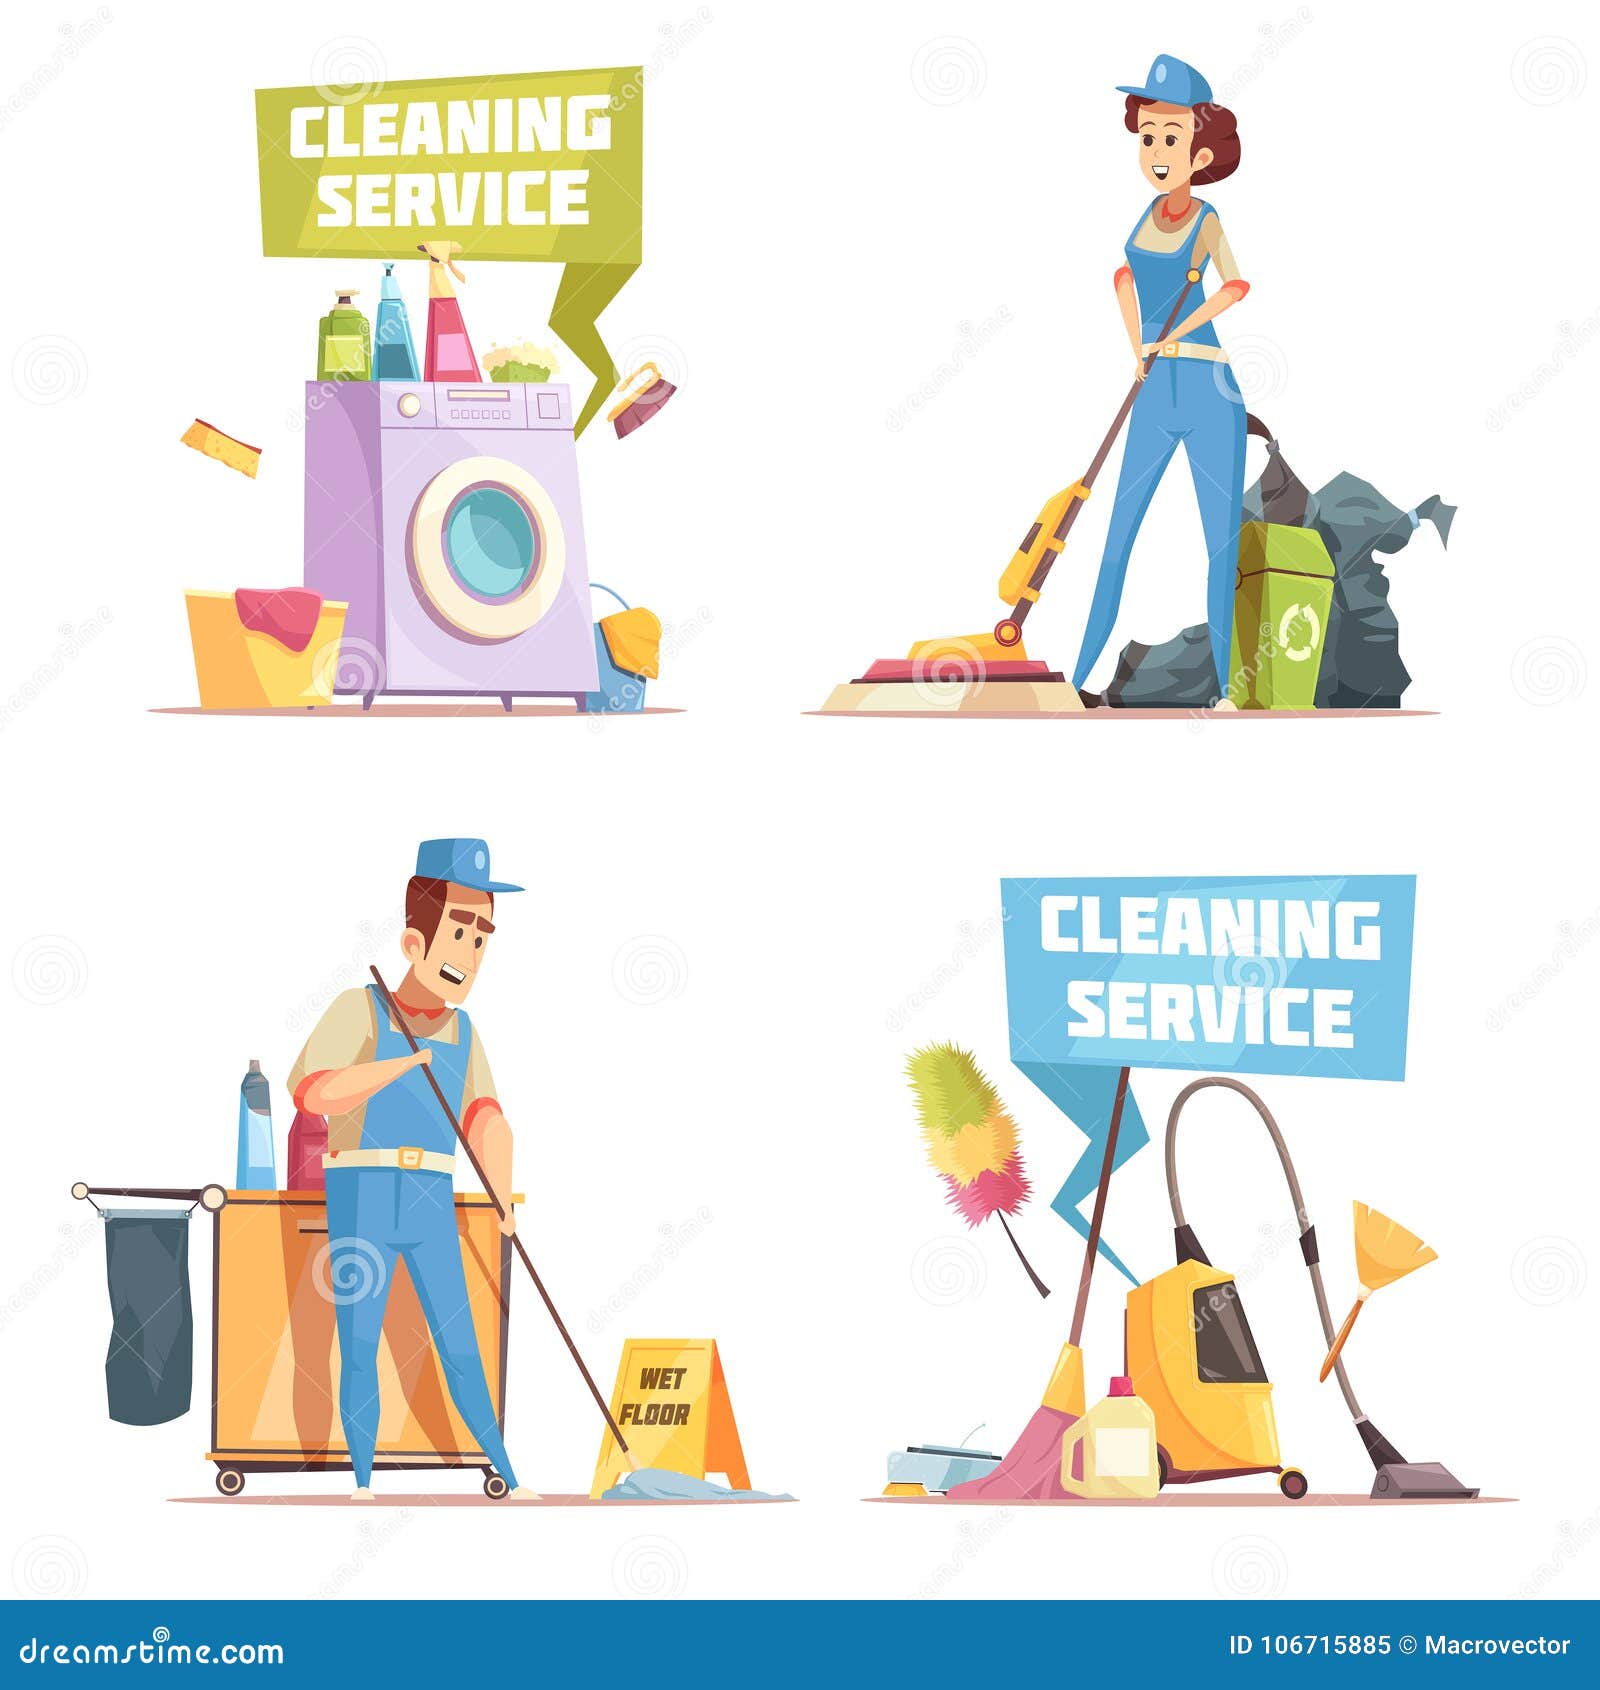 Desain Baju Cleaning Service : Cleaning service | Logo design, Cleaning, Logos